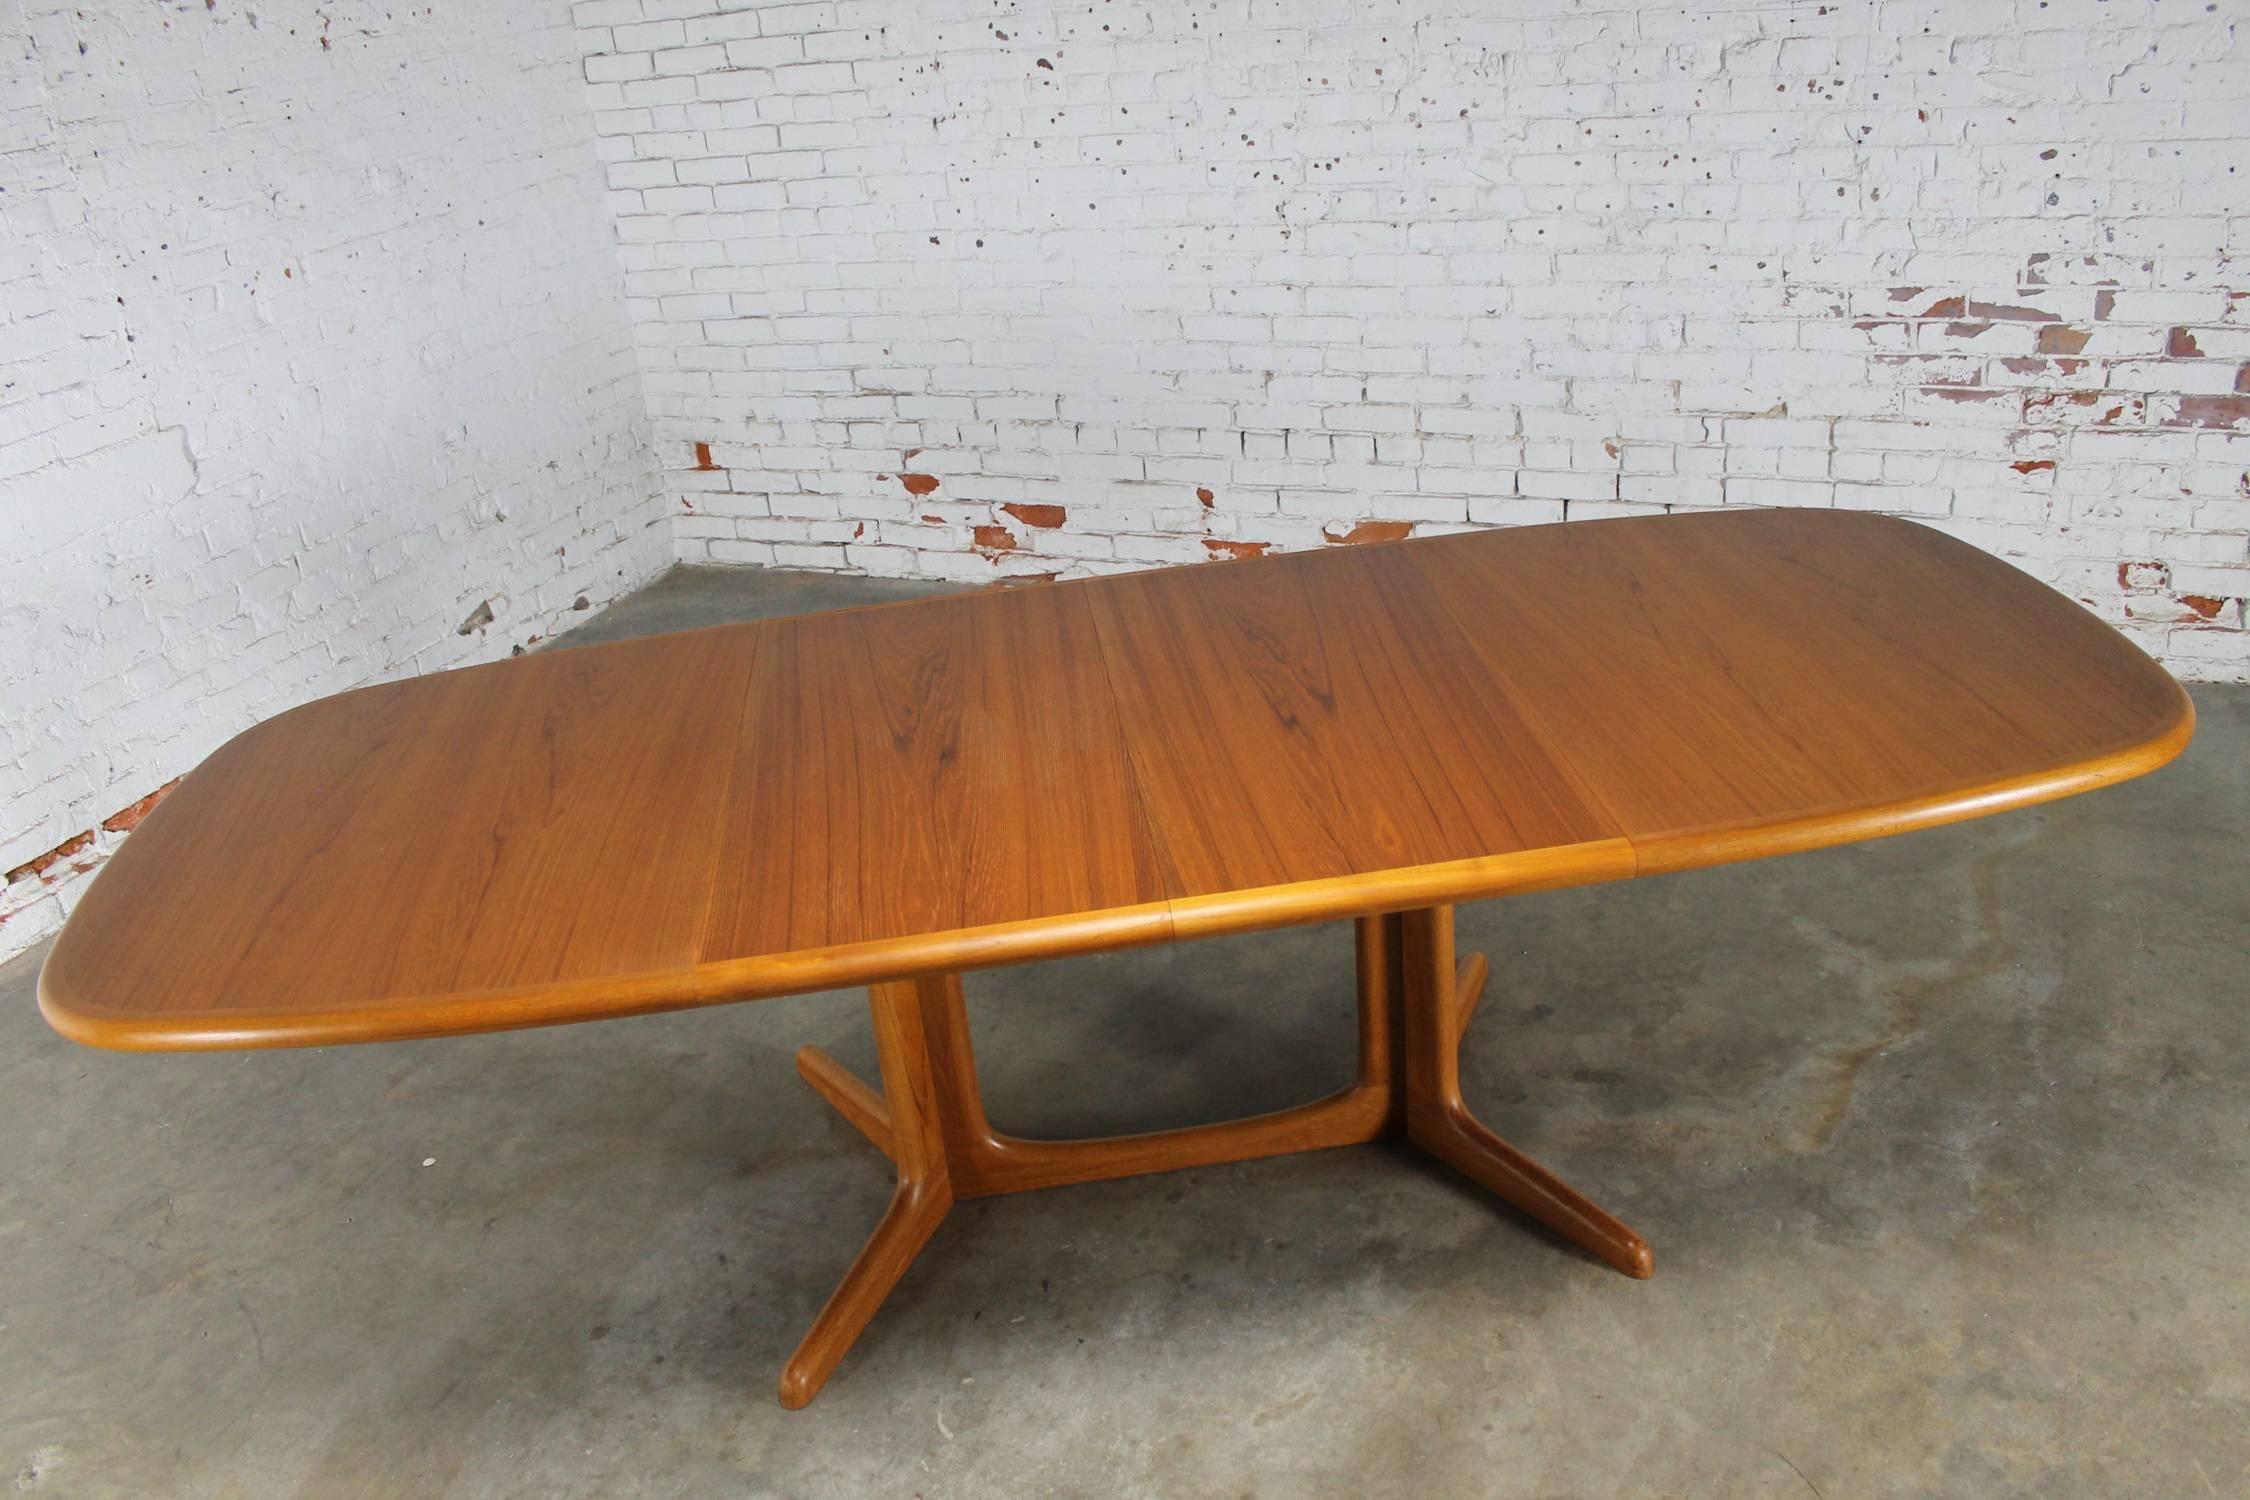 Gorgeous Danish Modern teak expanding dining table by Gudme Mobelfabrik. circa 1960 and in wonderful vintage Mid-Century condition. We have found no outstanding blemishes.

If you have a big family or love giving dinner parties, this is the table